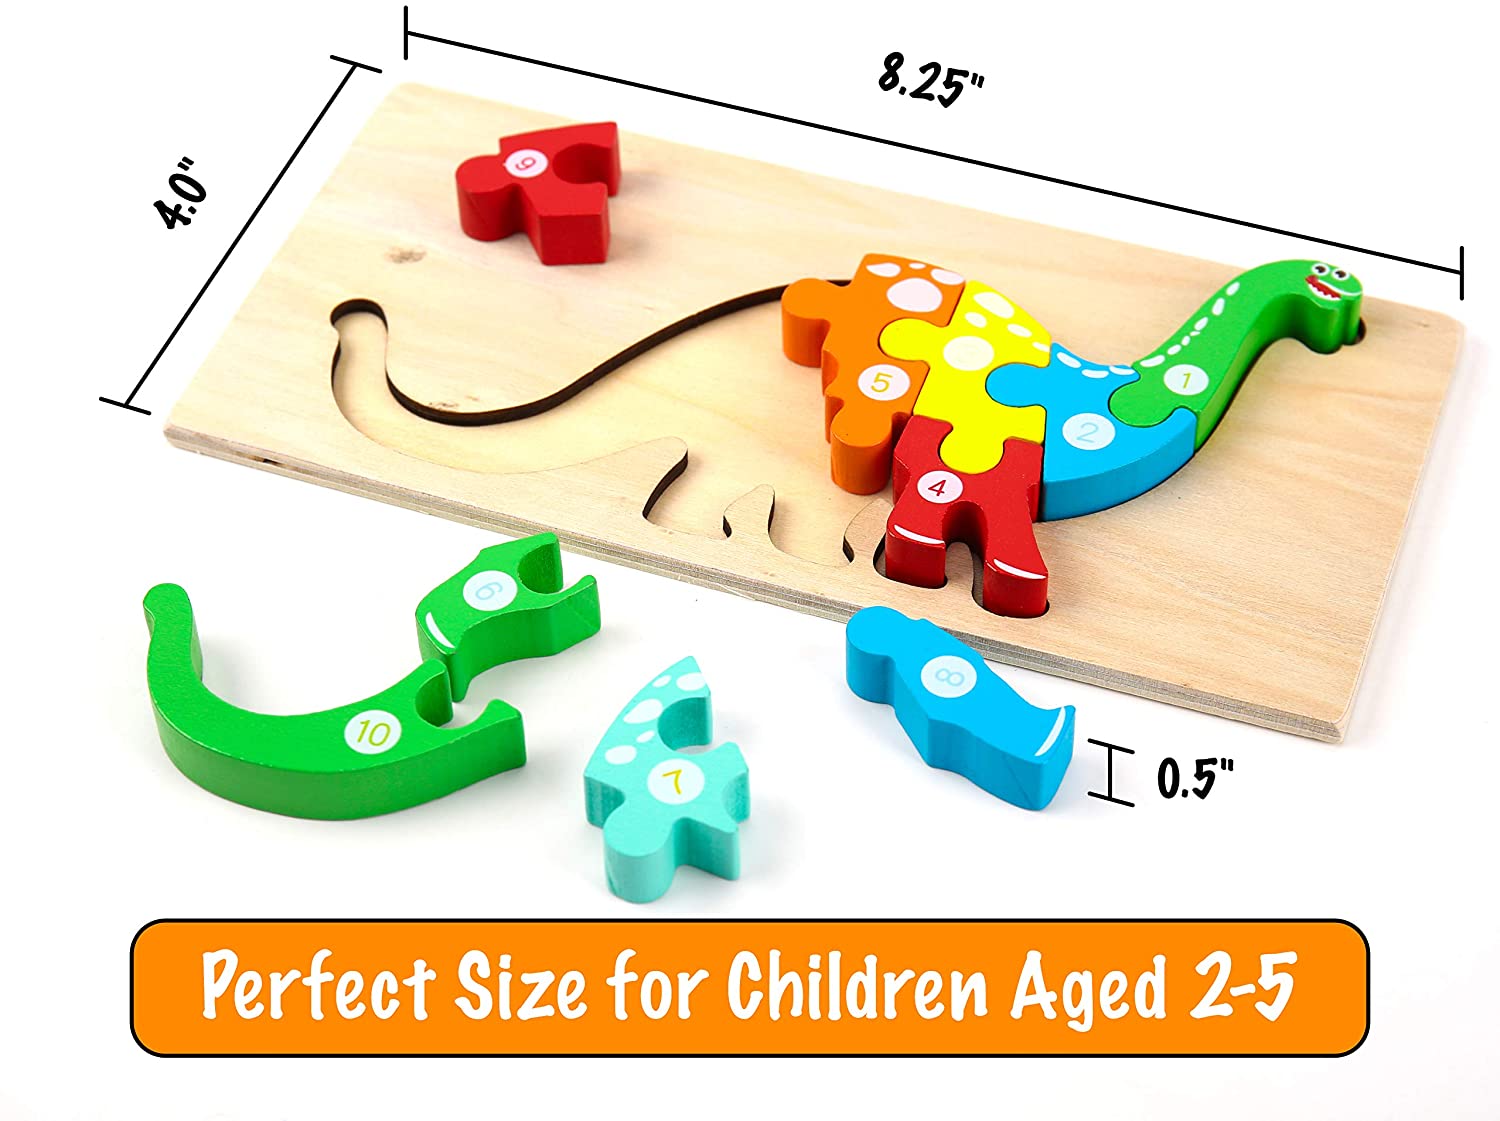 https://bigbigmart.com/wp-content/uploads/2021/12/Montessori-Mama-Wooden-Toddler-Puzzles-for-Kids-Ages-2-4-Montessori-Toys-3.jpg